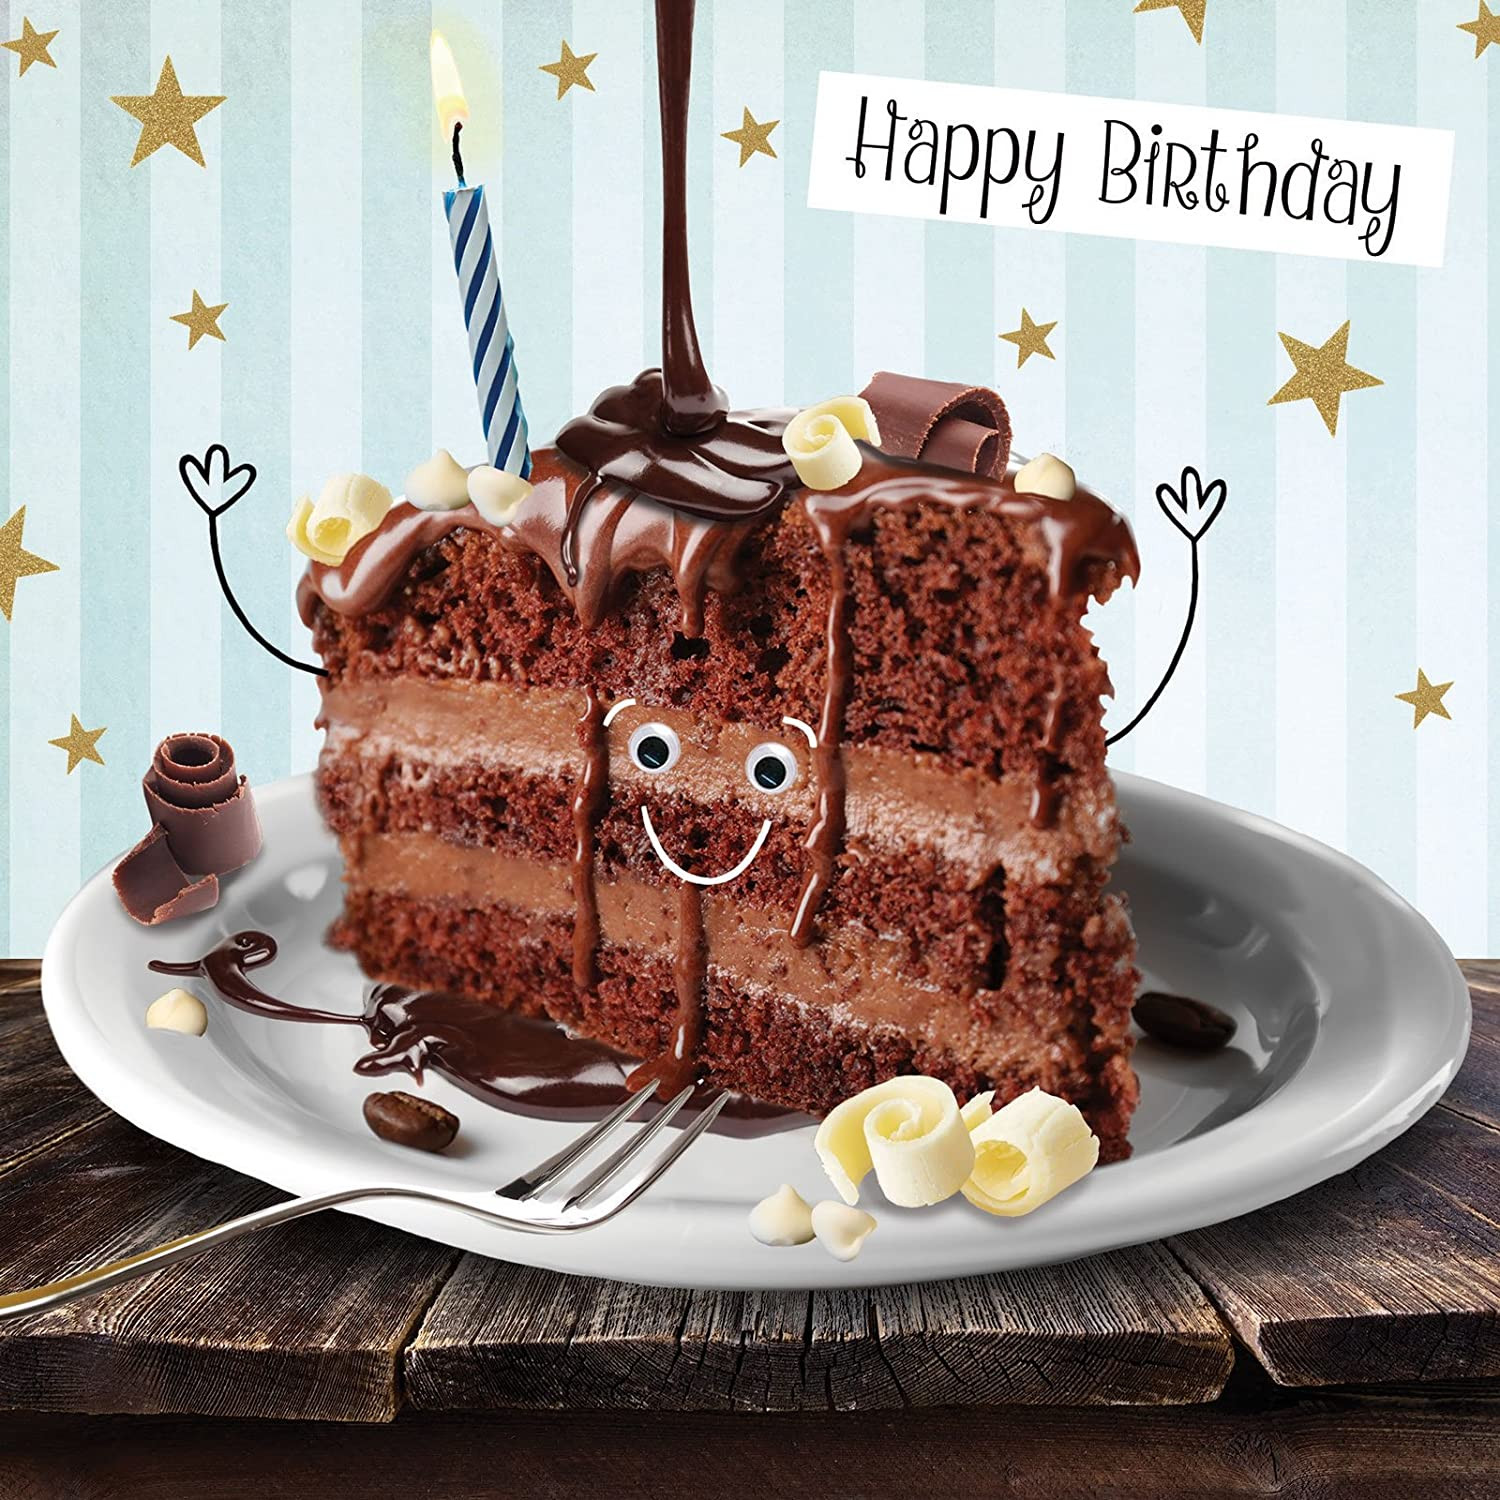 Birthday Cake Pictures Funny
 Funny Chocolate Cake Birthday Card 3D Goggly Moving Eyes